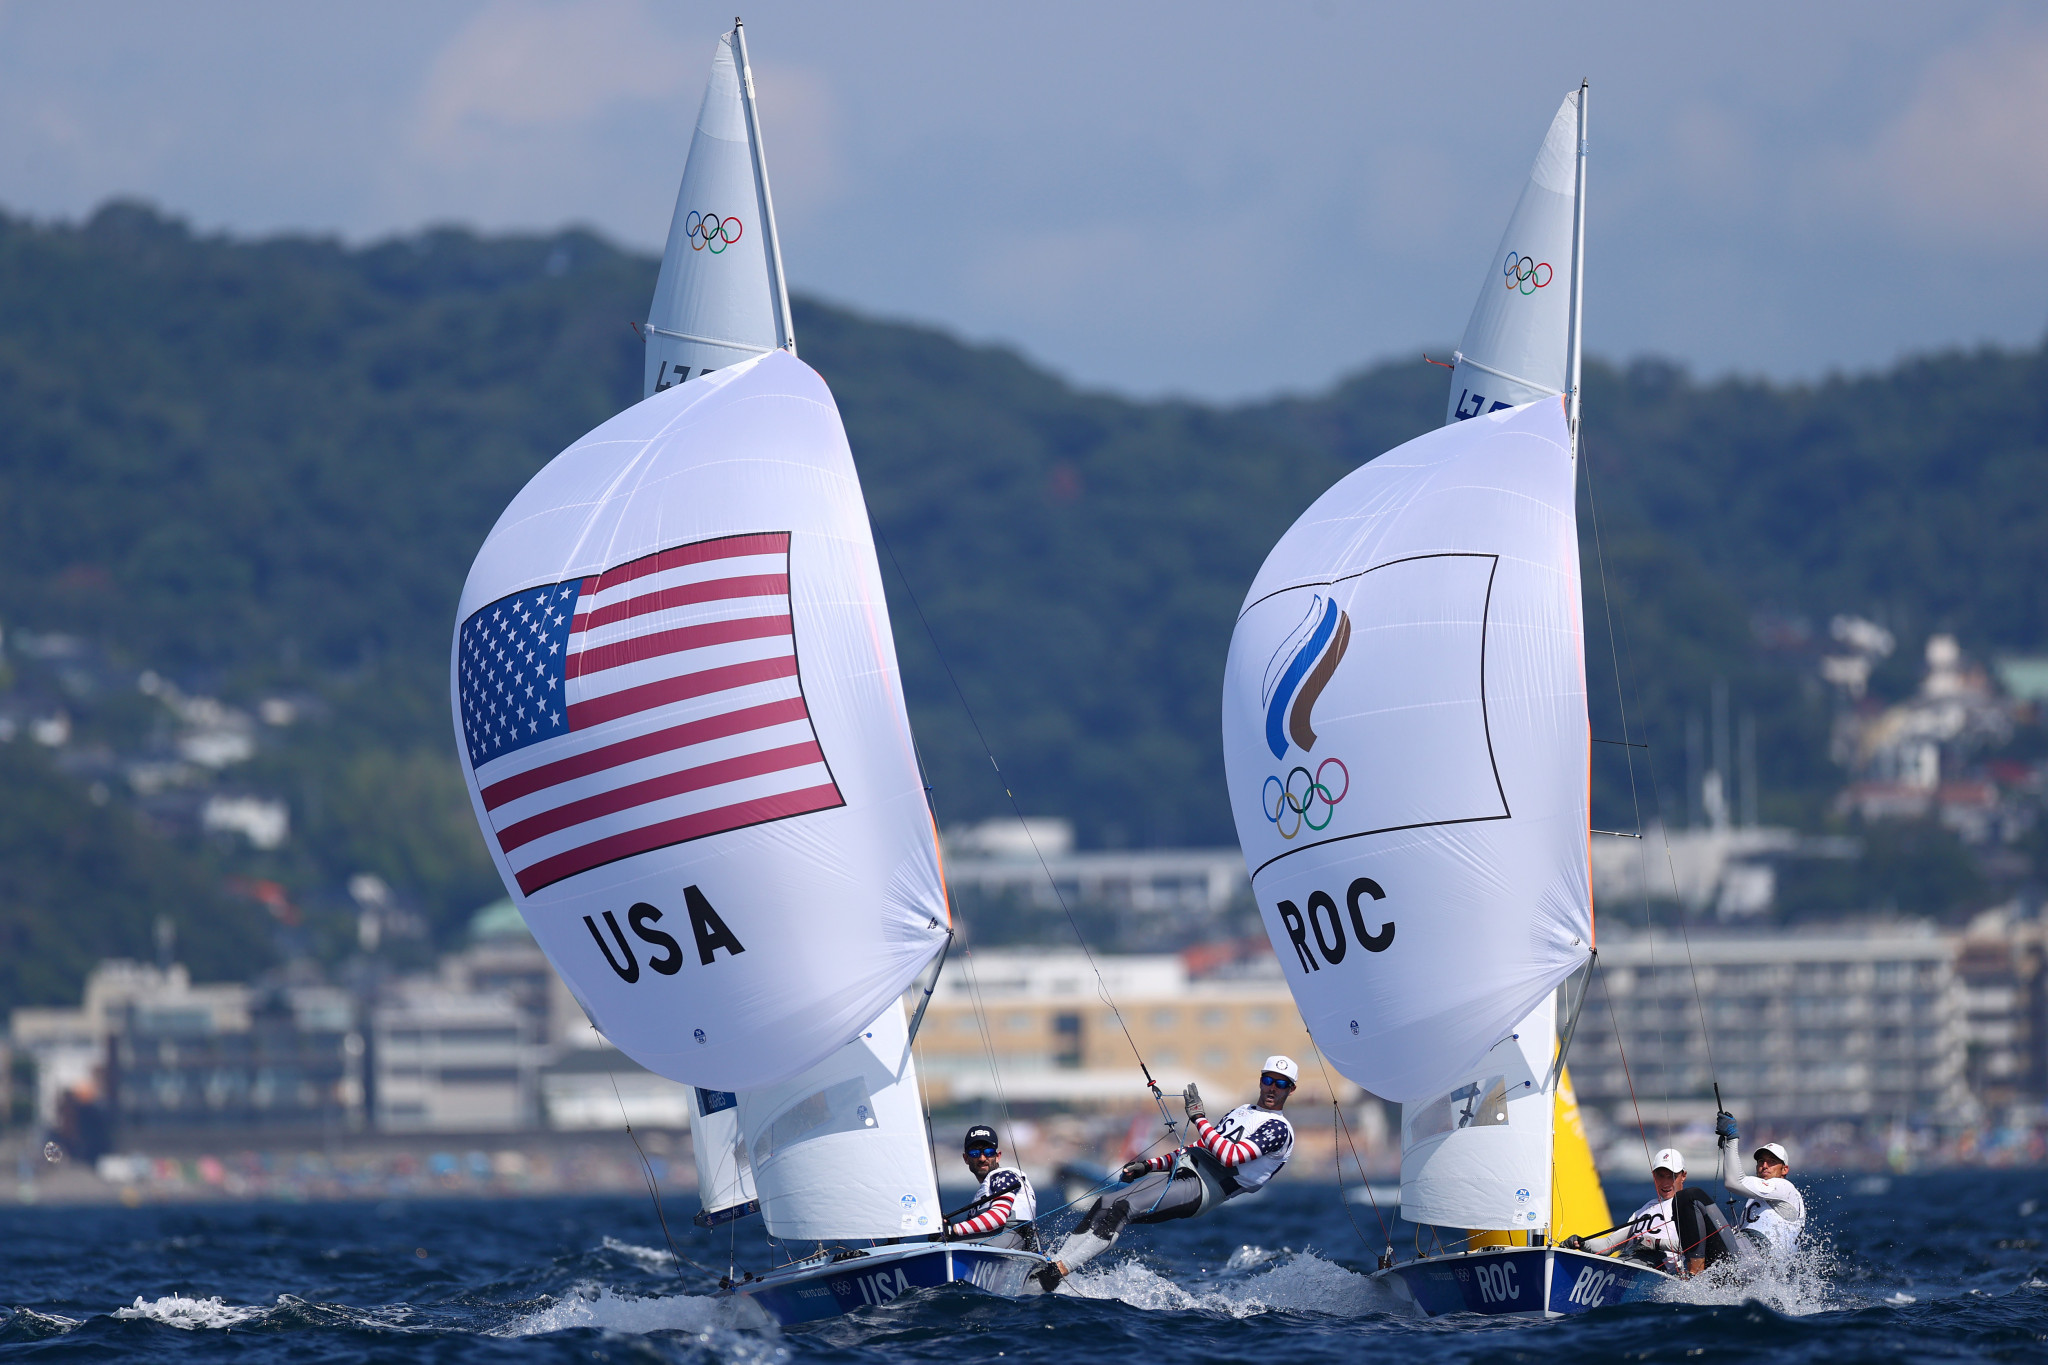 Tokyo 2020 proved to be a difficult Olympics for US sailors as they failed to secure a podium slot ©Getty Images